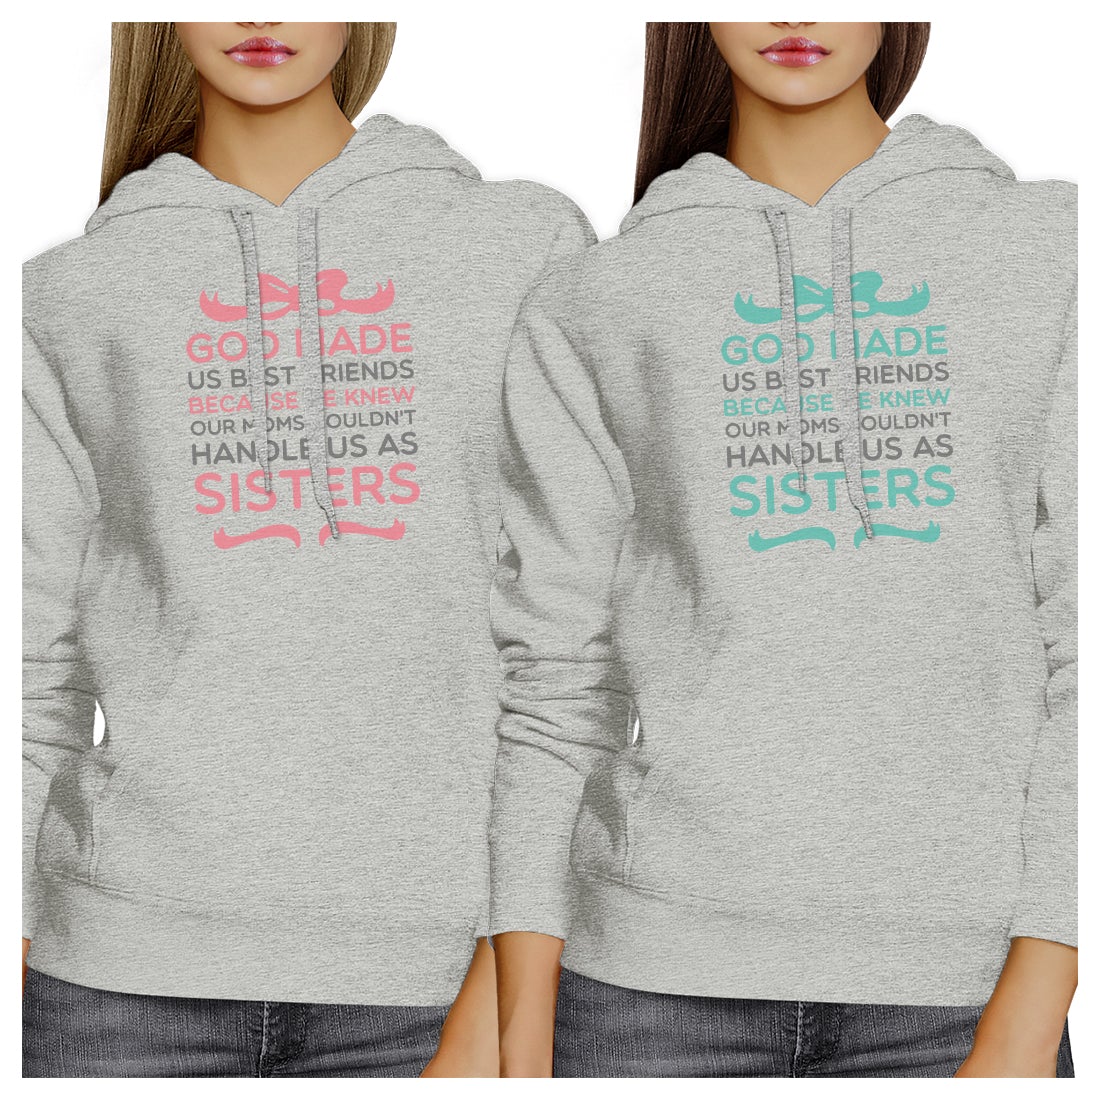 God Made Us BFF Pullover Hoodies Matching Gift Birthday Best Friend Light Gray